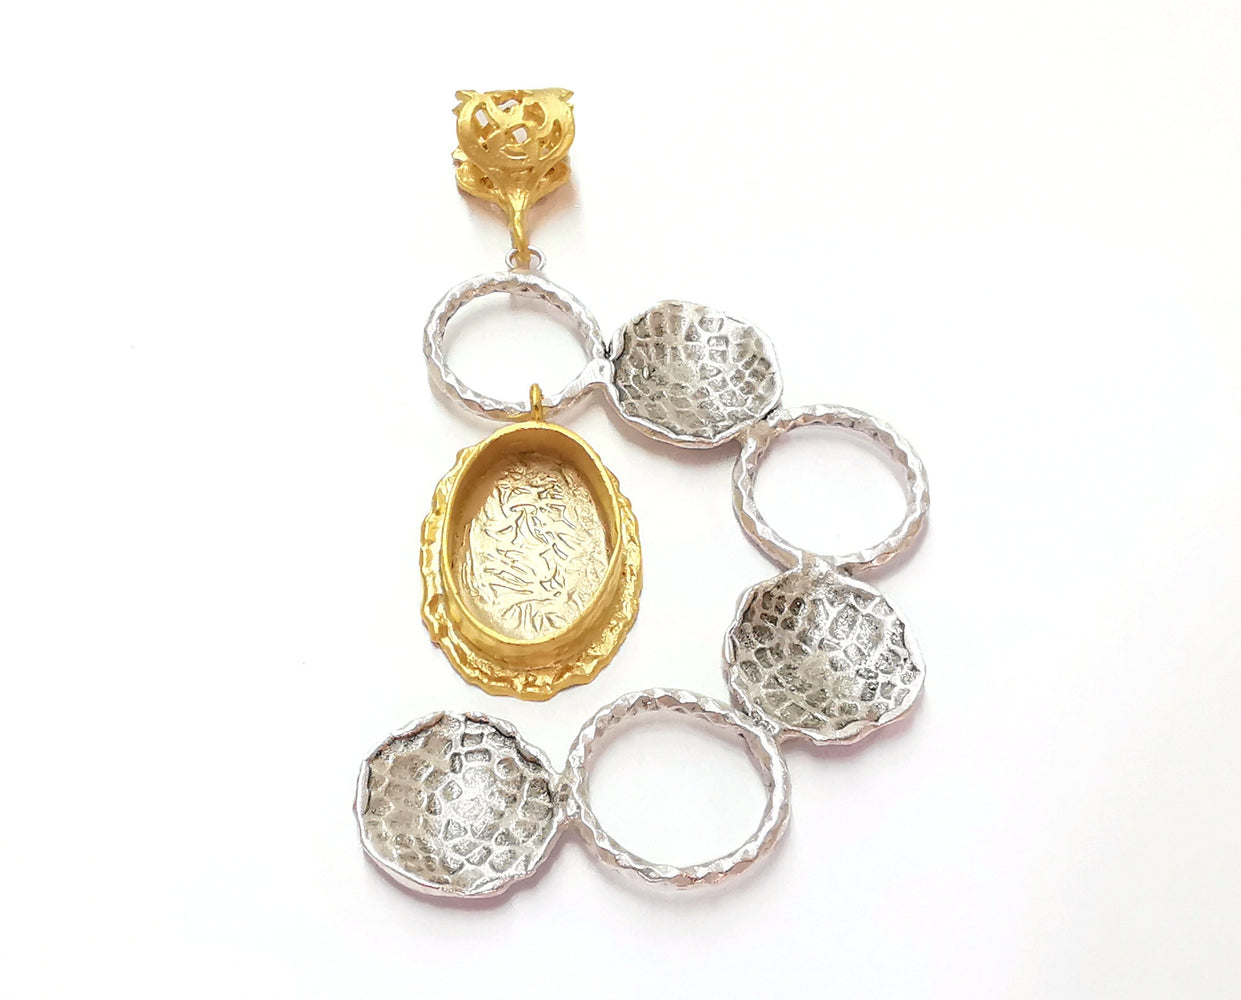 Hammered Pendant Blank Resin Bezel Mosaic Mountings Antique Silver and Gold Plated Brass (82x46mm)(19x13mm Bezel Size)  G26312